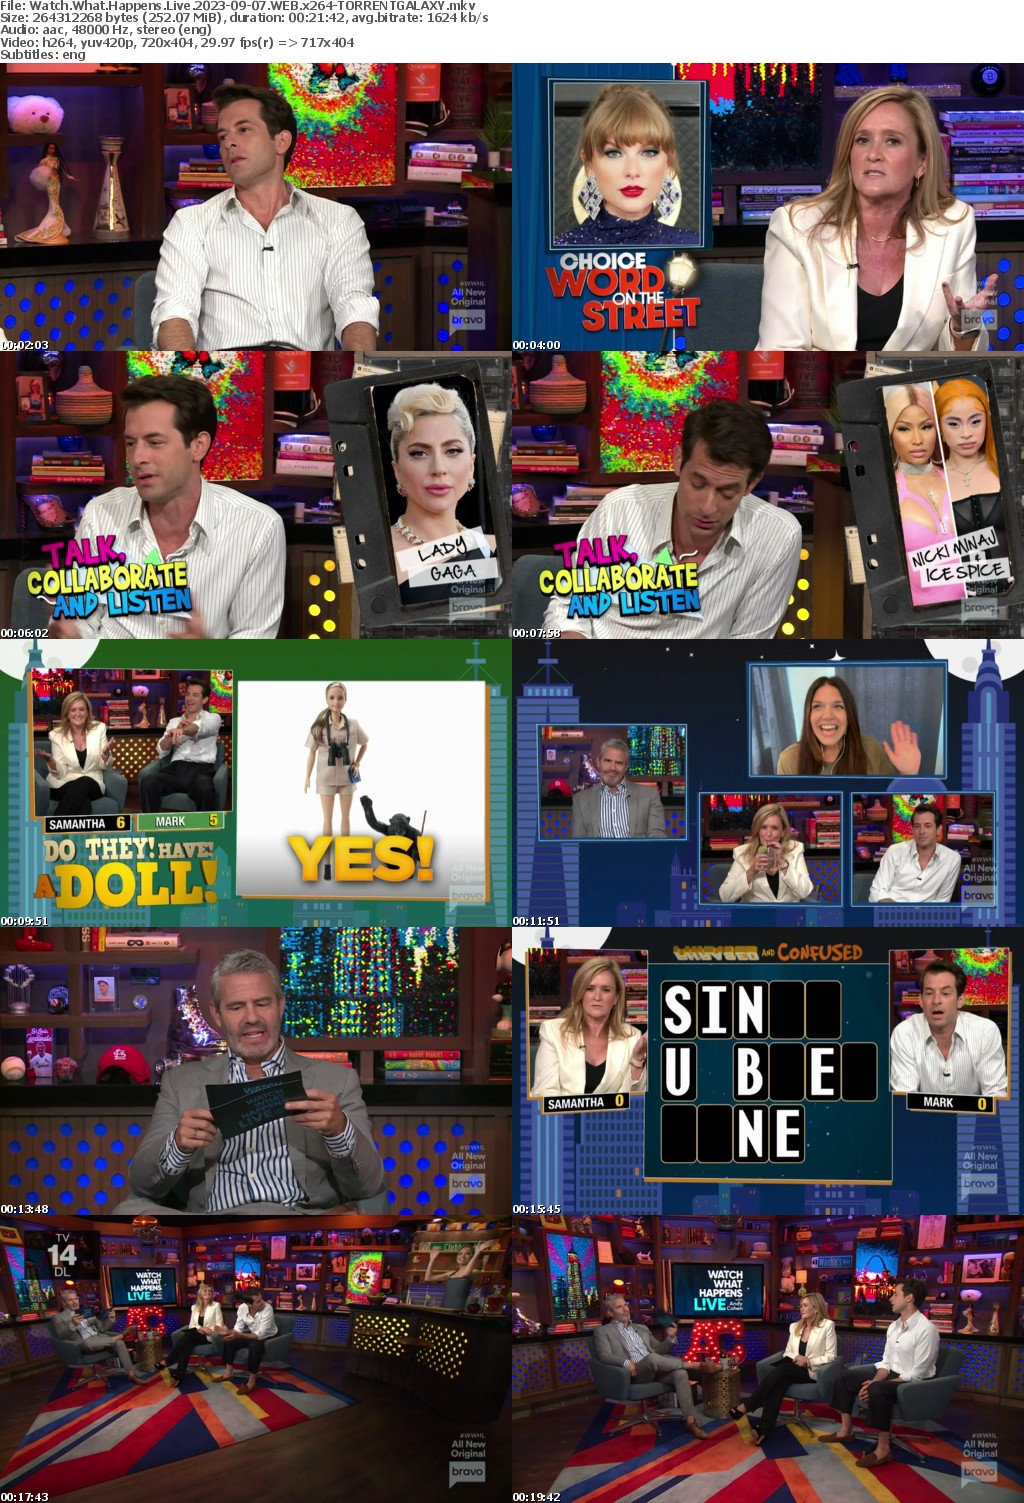 Watch What Happens Live 2023-09-07 WEB x264-GALAXY